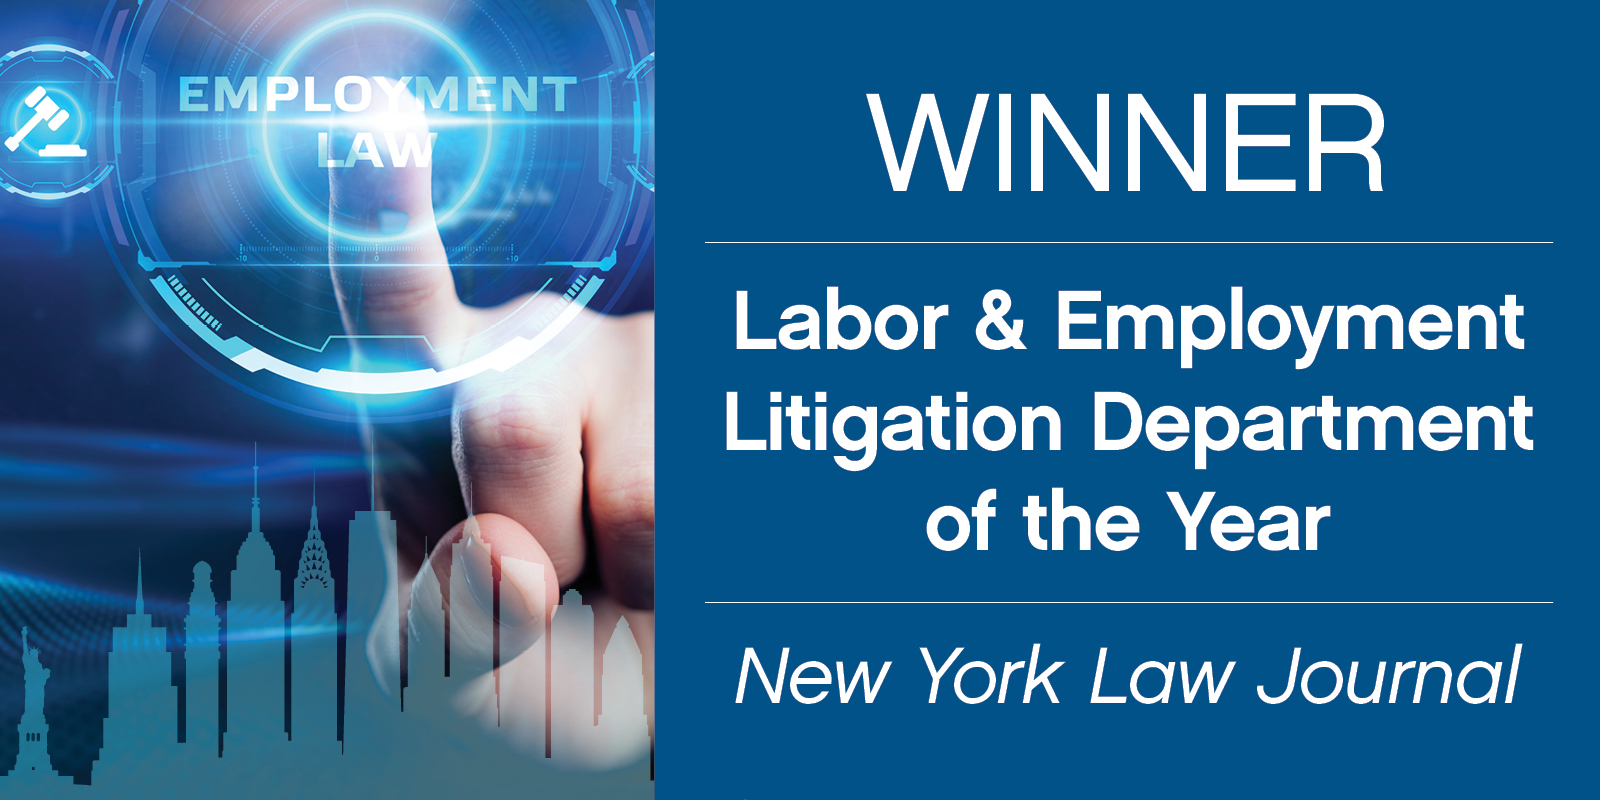 New York Law Journal Graphic_SOCIAL